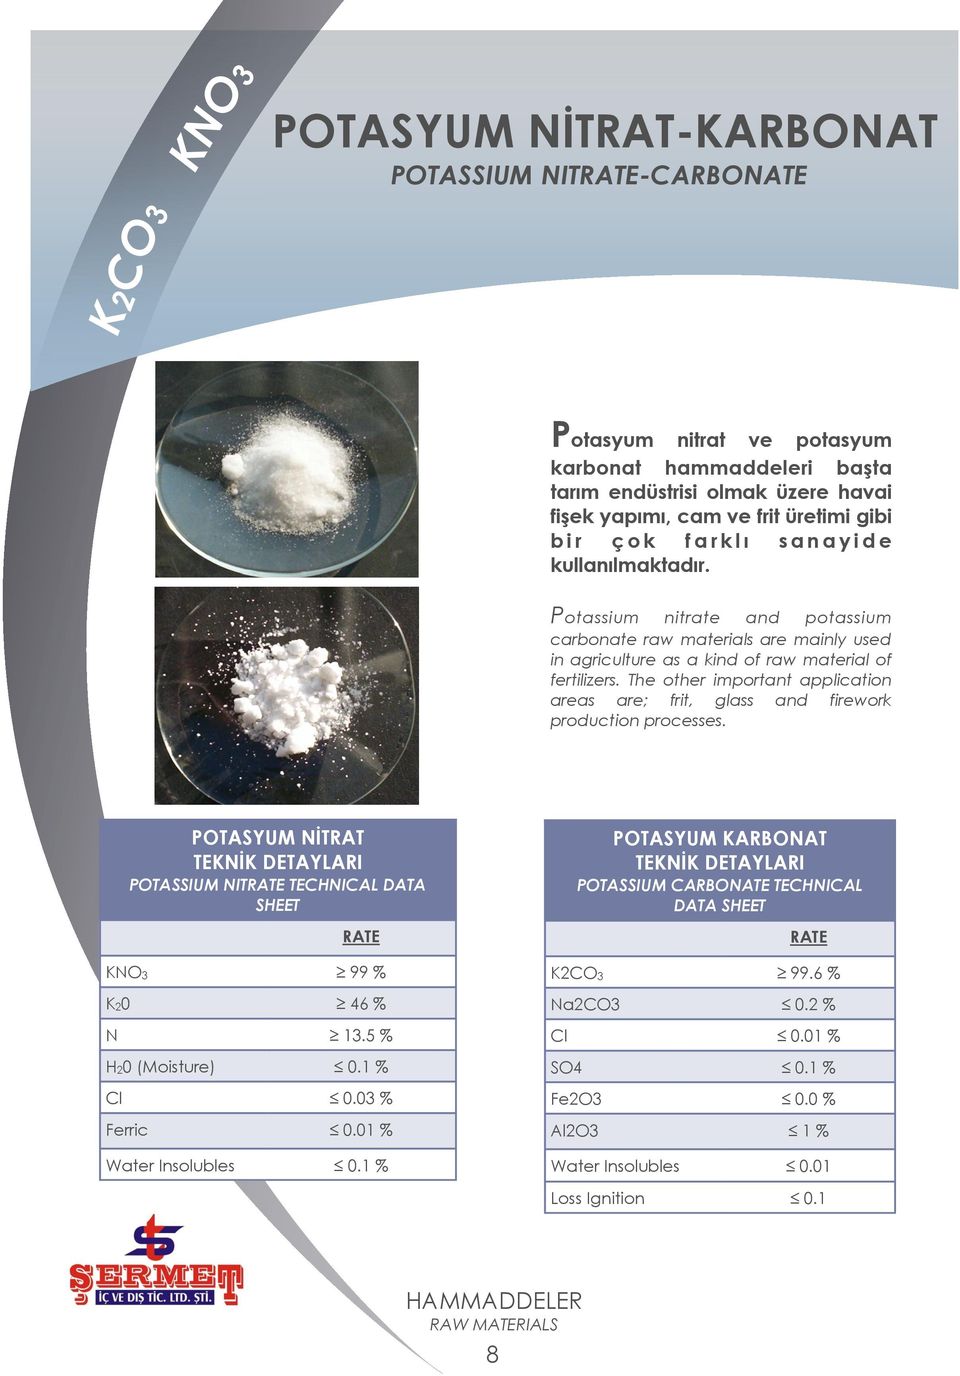 The other important application areas are; frit, glass and firework production processes. POTASYUM NĠTRAT TEKNĠK DETAYLARI POTASSIUM NITRATE TECHNICAL DATA SHEET RATE KNO3 99 % K20 46 % N 13.